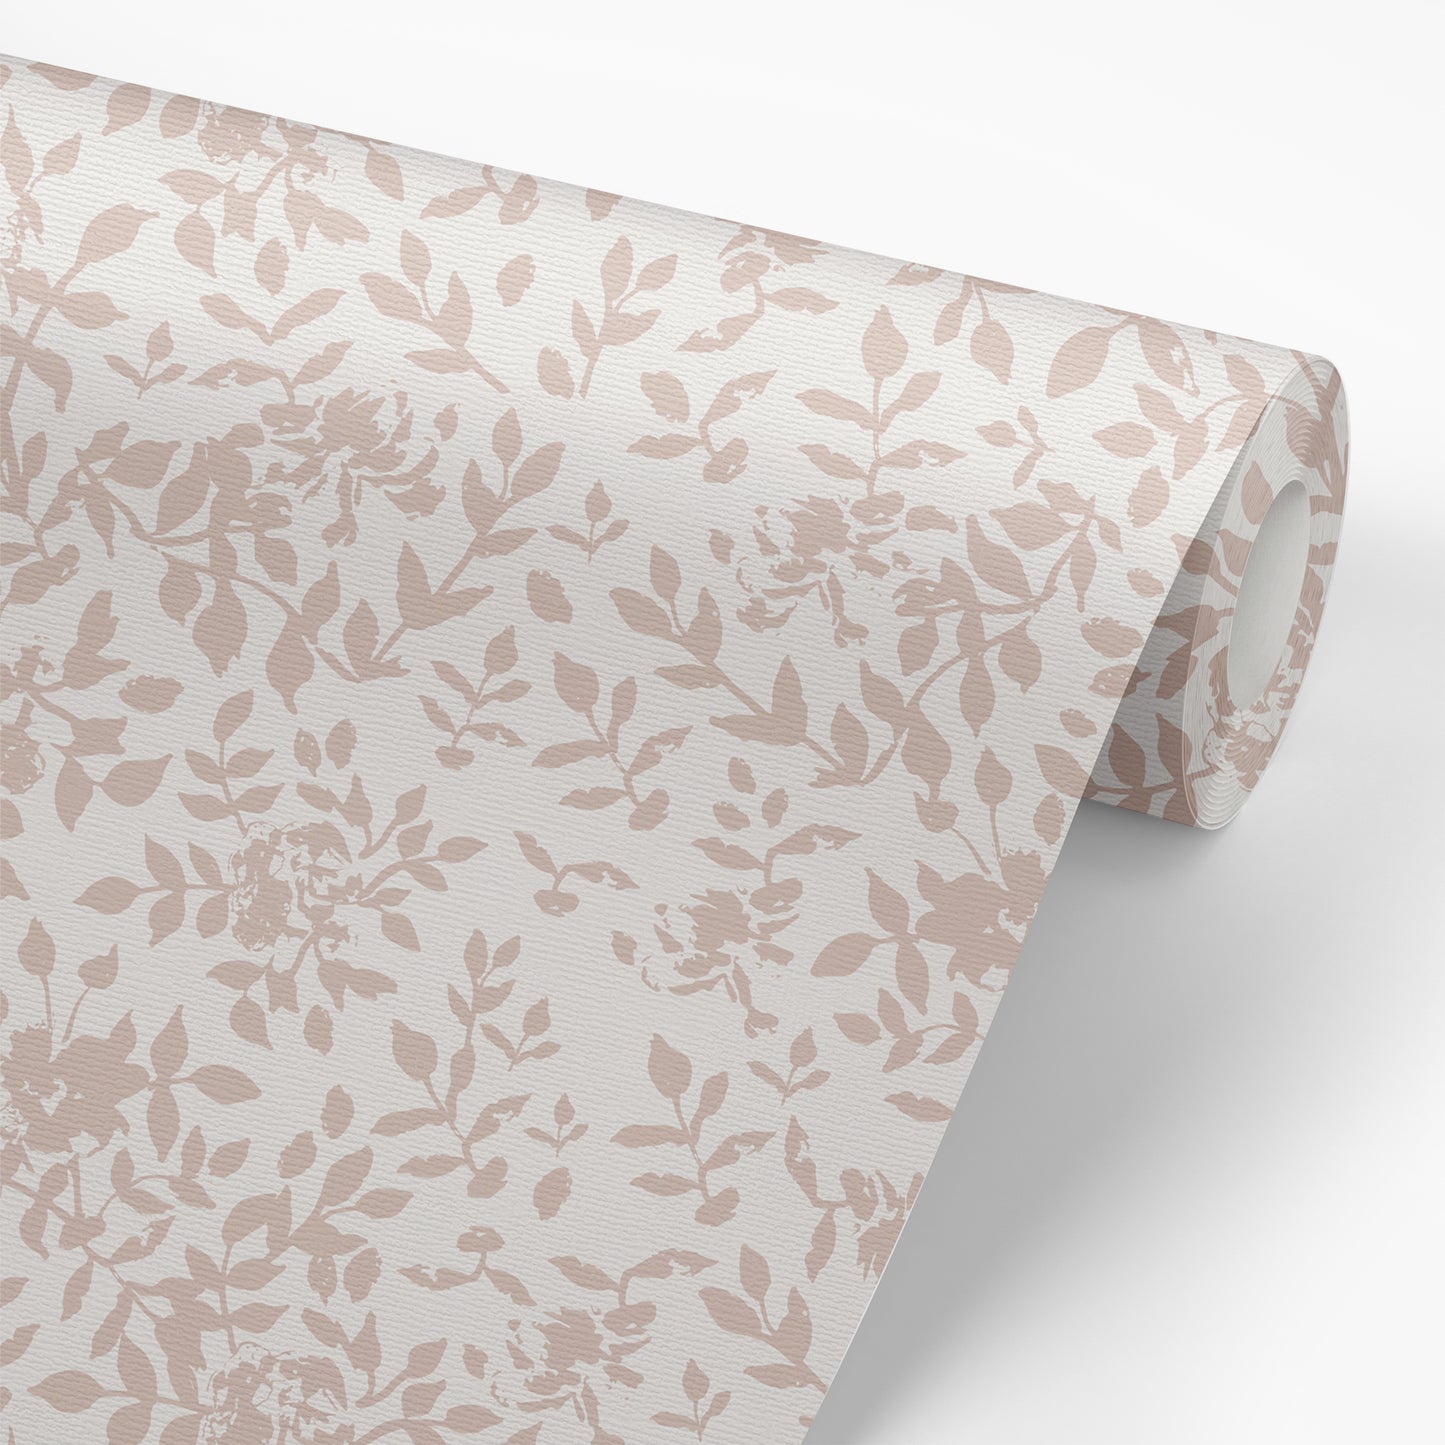 Wallpaper panel featuring our floral Florence peel and stick wallpaper in pink, taupe nude on a white background. This organic floral has a painted feel and makes the perfect accent wall!